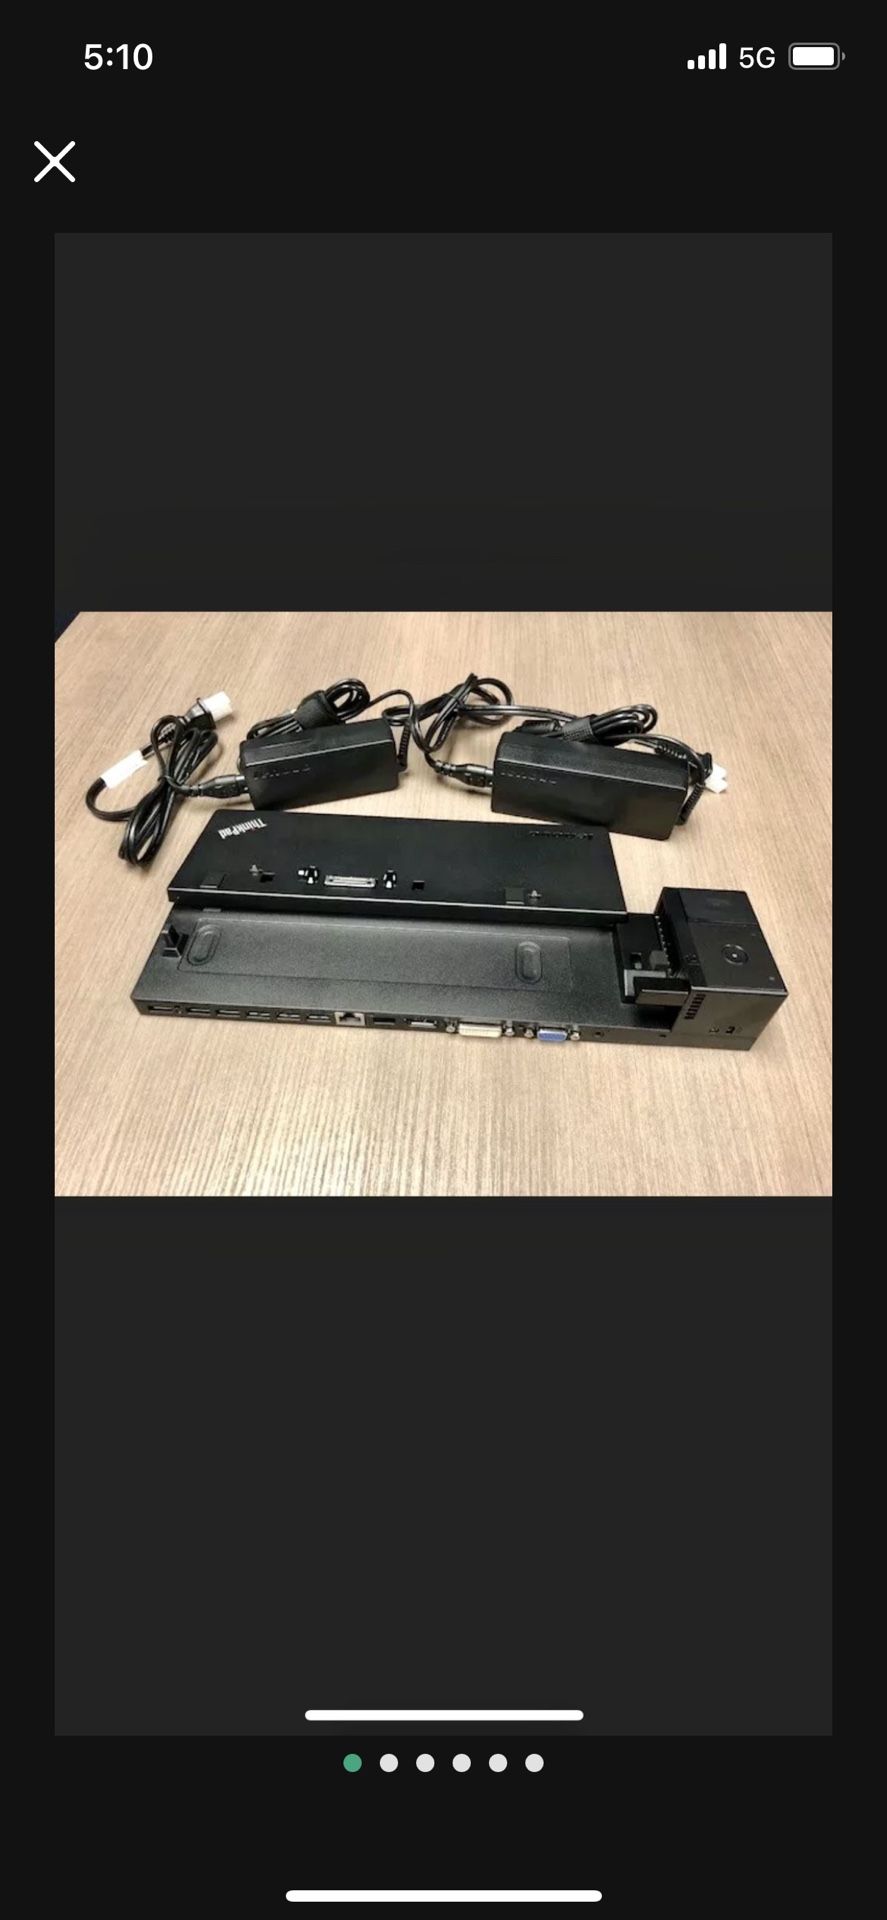 1 Used Docking Station + 1 Power Adapter Lenovo Ultradock for T440-T470s Or Buy 2 for $40 & Get 1 Dock / 1 Power Adapter Free